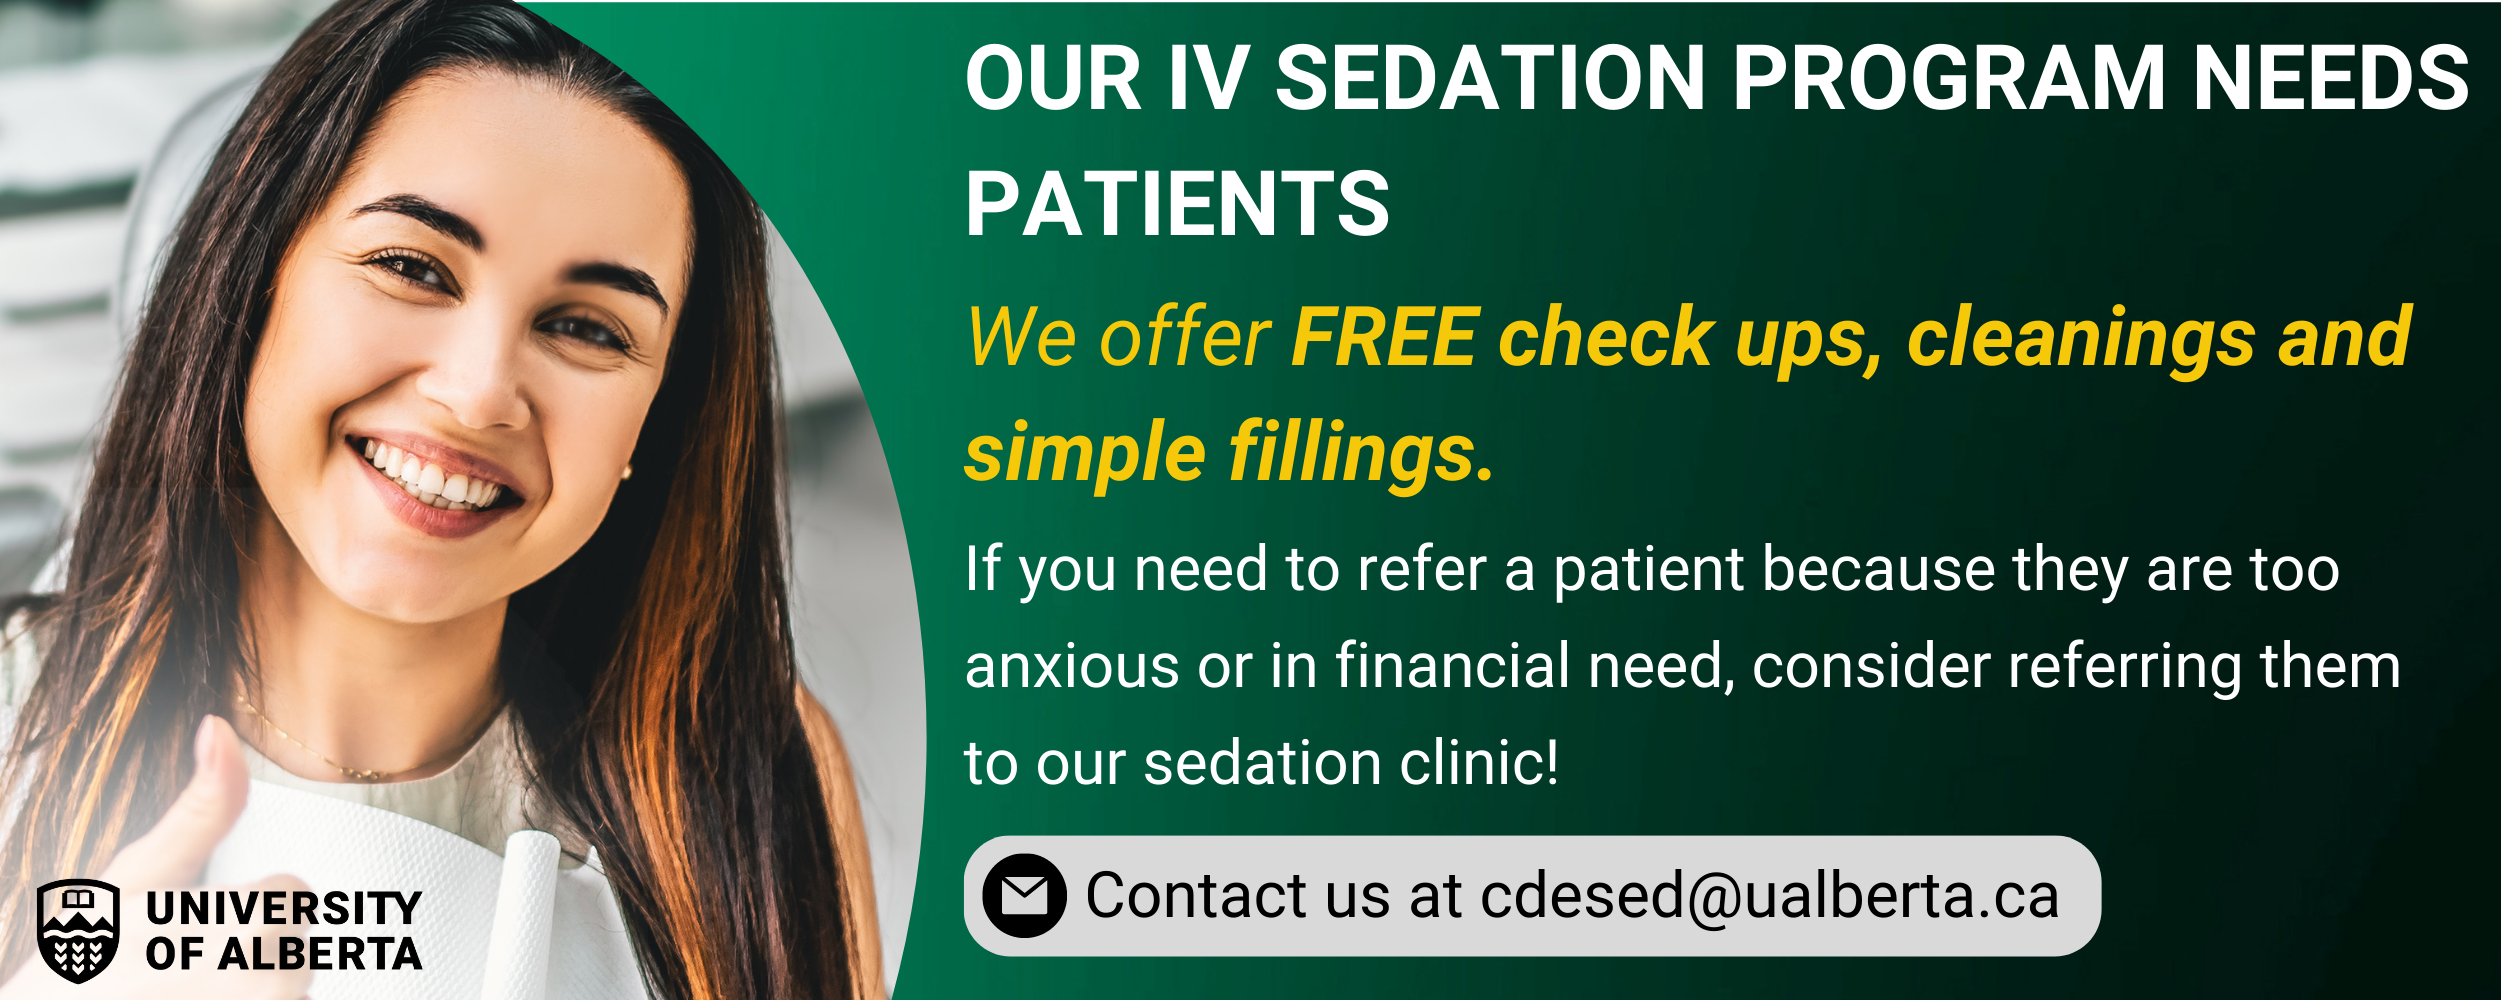 If you have patients who are struggling financially or suffer from anxiety when undergoing dental procedures, consider referring them to our Sedation Clinic where they can receive free dental work. Reach out to cdesed@ualberta.ca for more information.